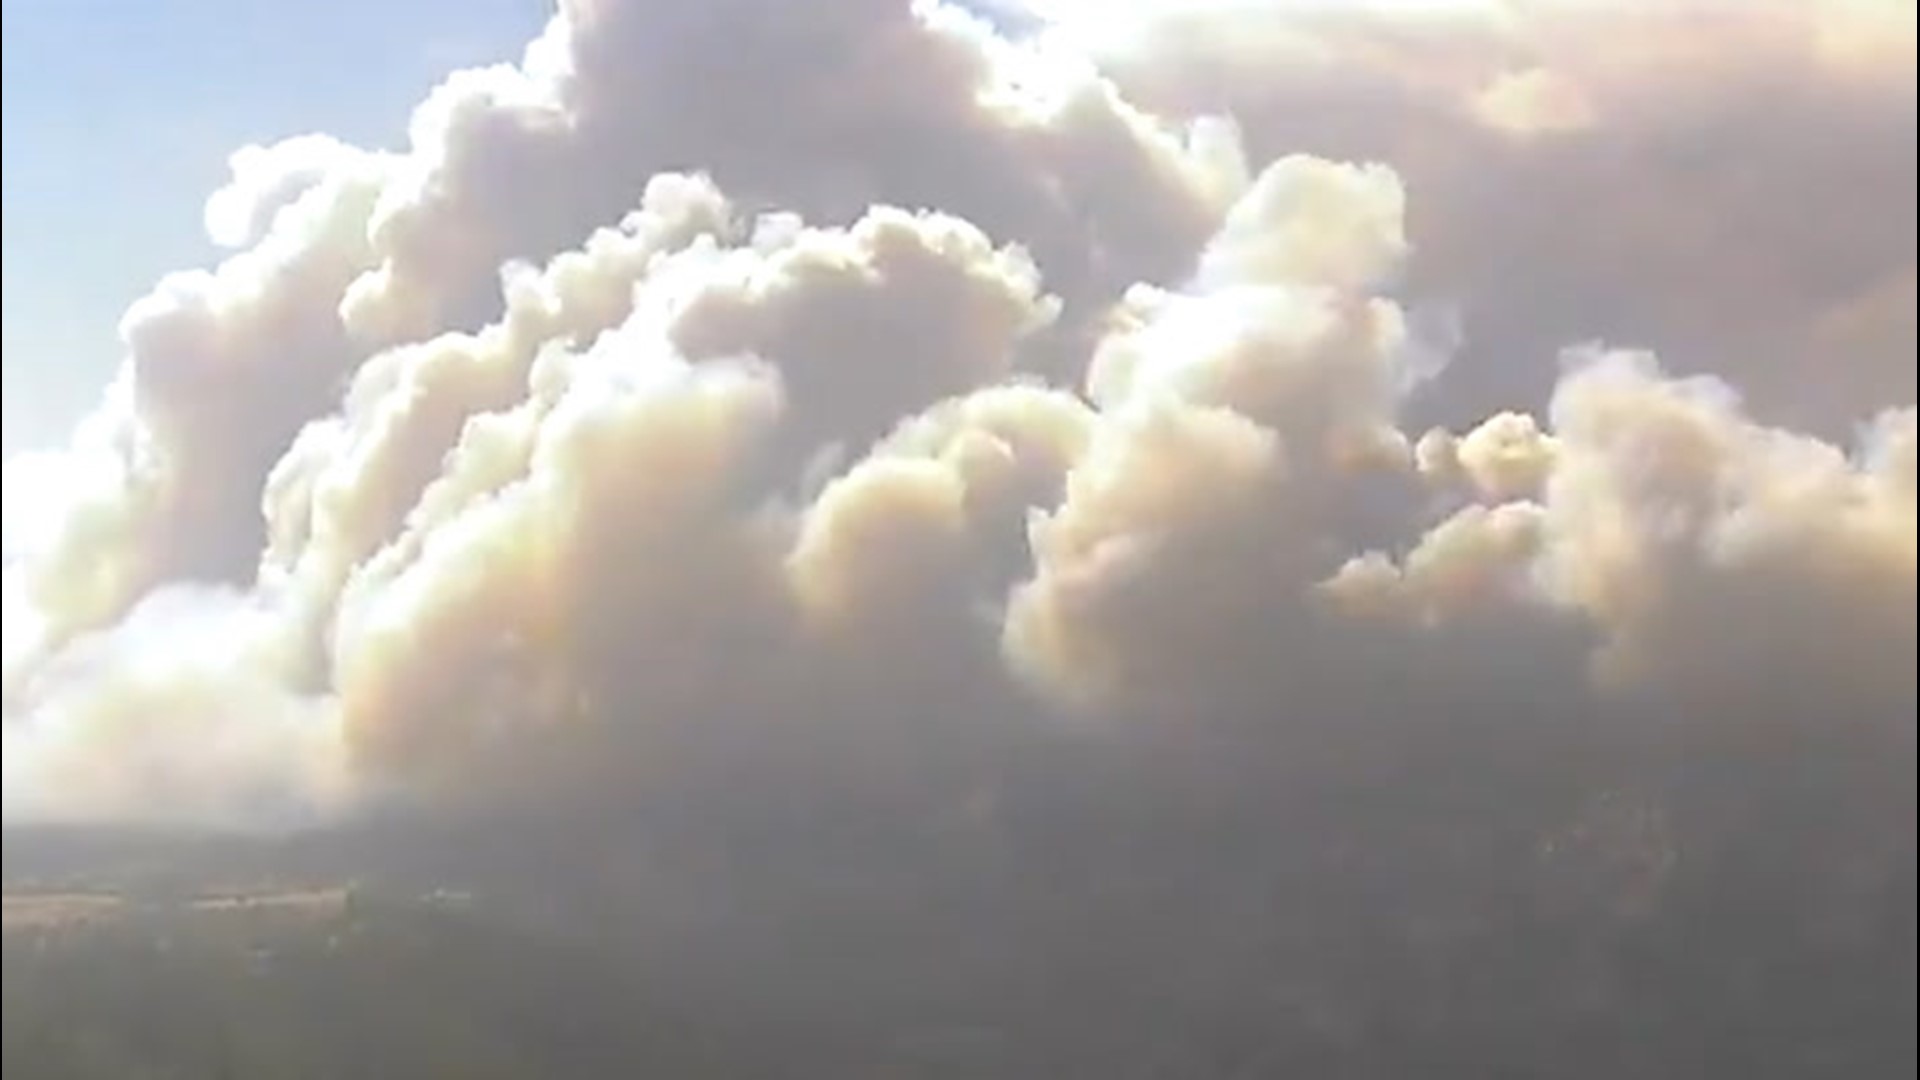 A time-lapse video captured thick smoke rising up from the 7,000-acre Zogg Fire in Shasta County, California, on Sept. 27, as officials ordered residents nearby to evacuate their homes.